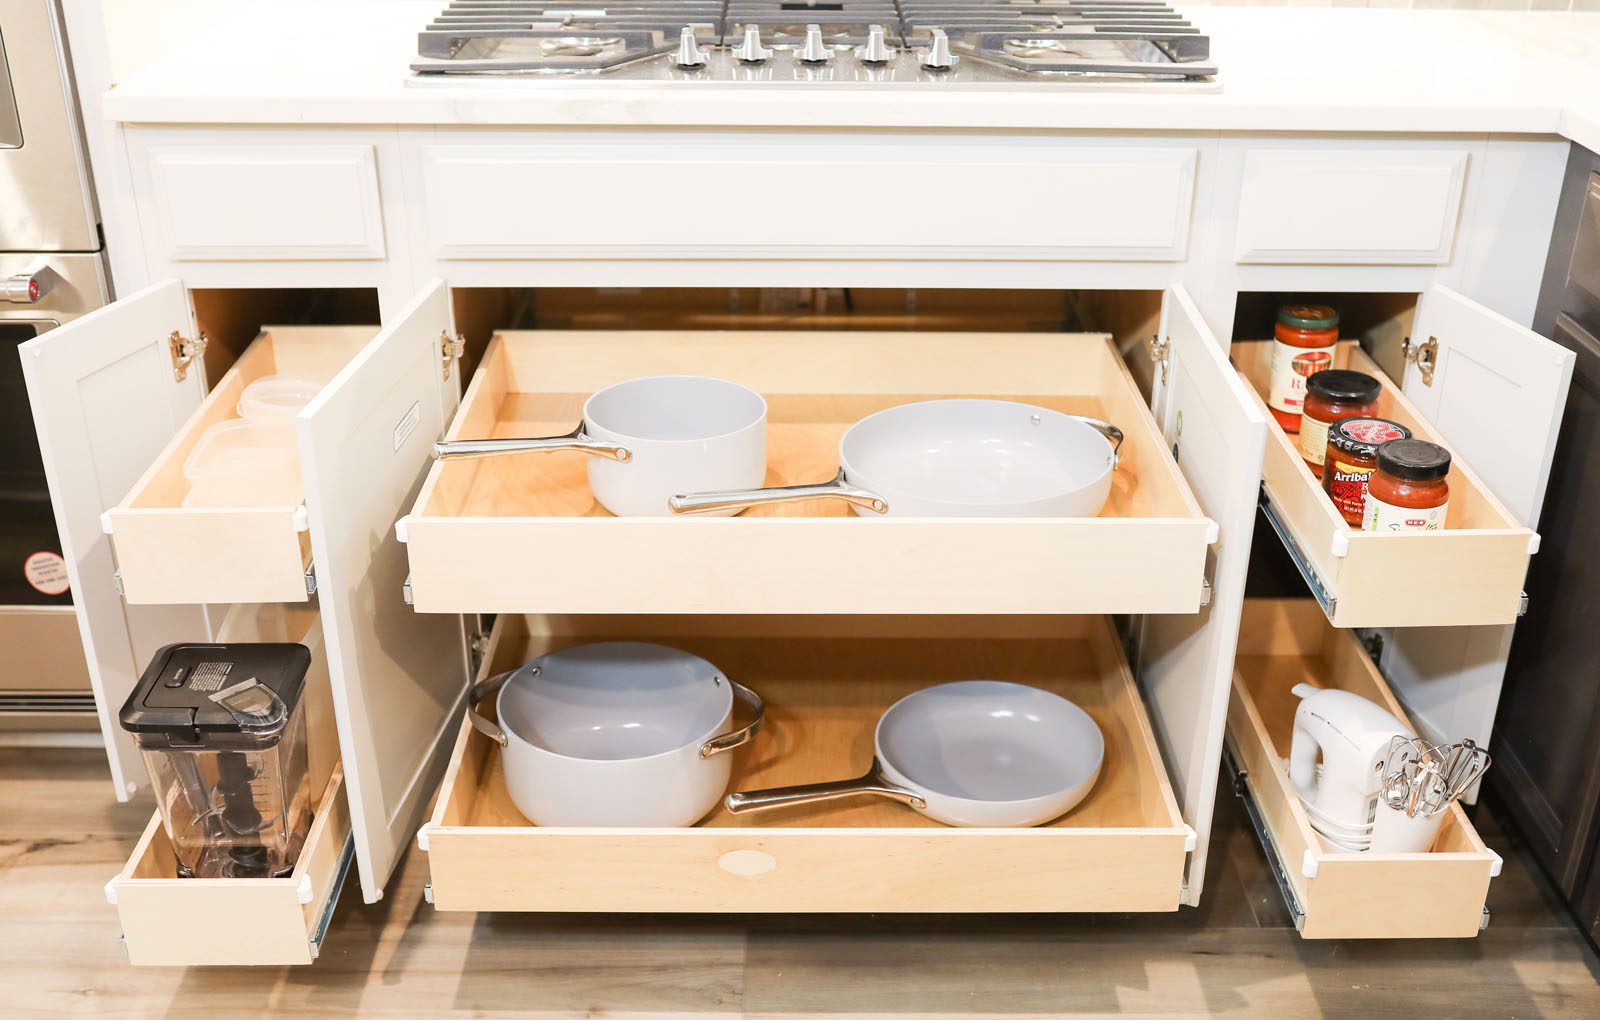 Pull Out Shelf for Kitchen Cabinets